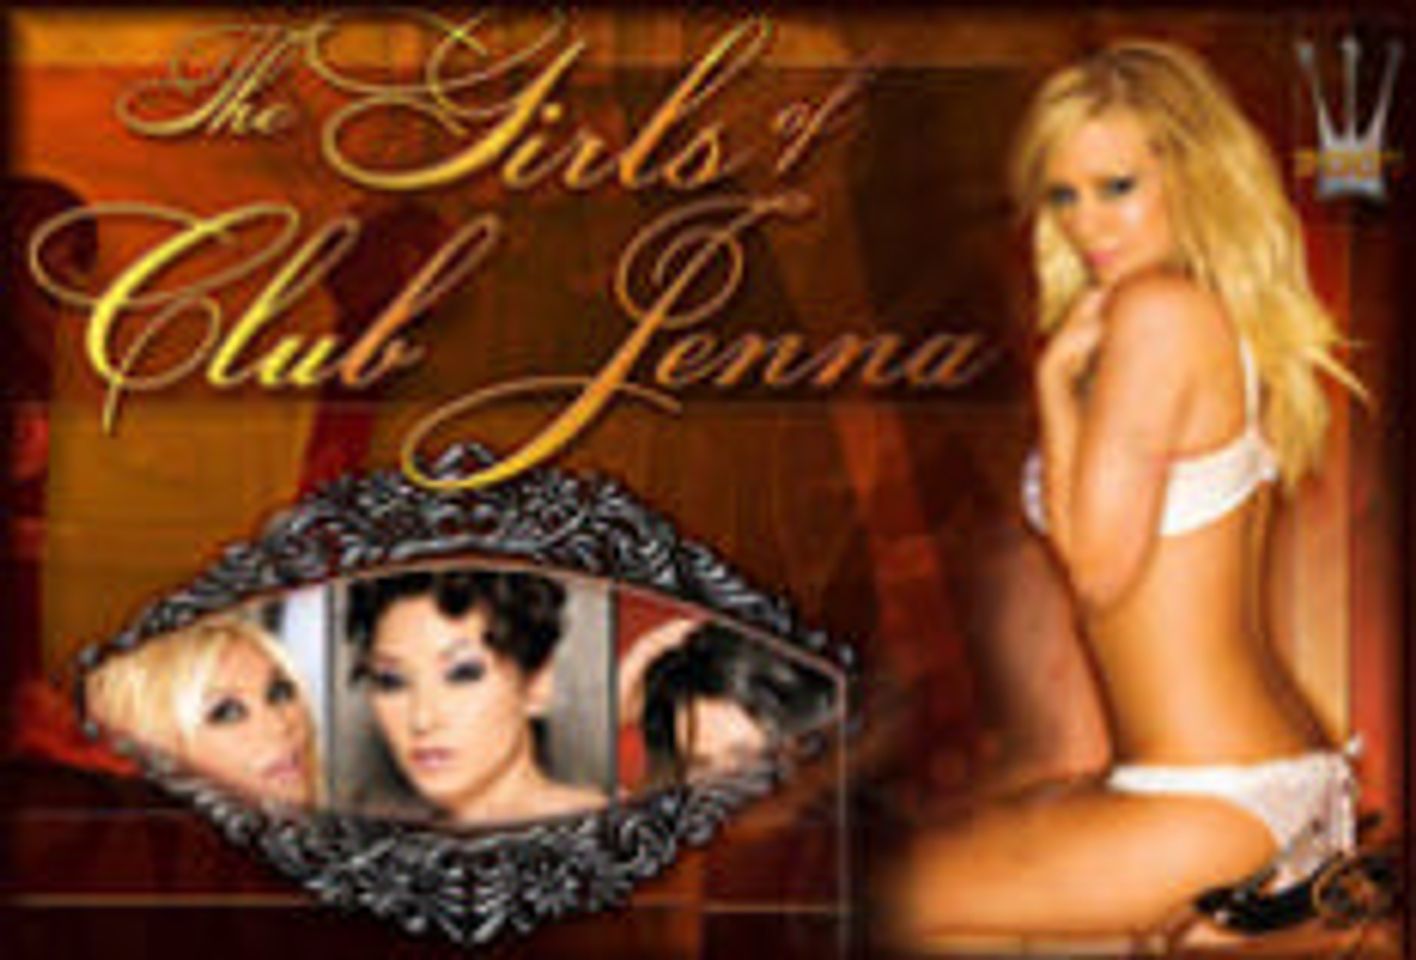 The Girls of Club Jenna Calender Unveiled